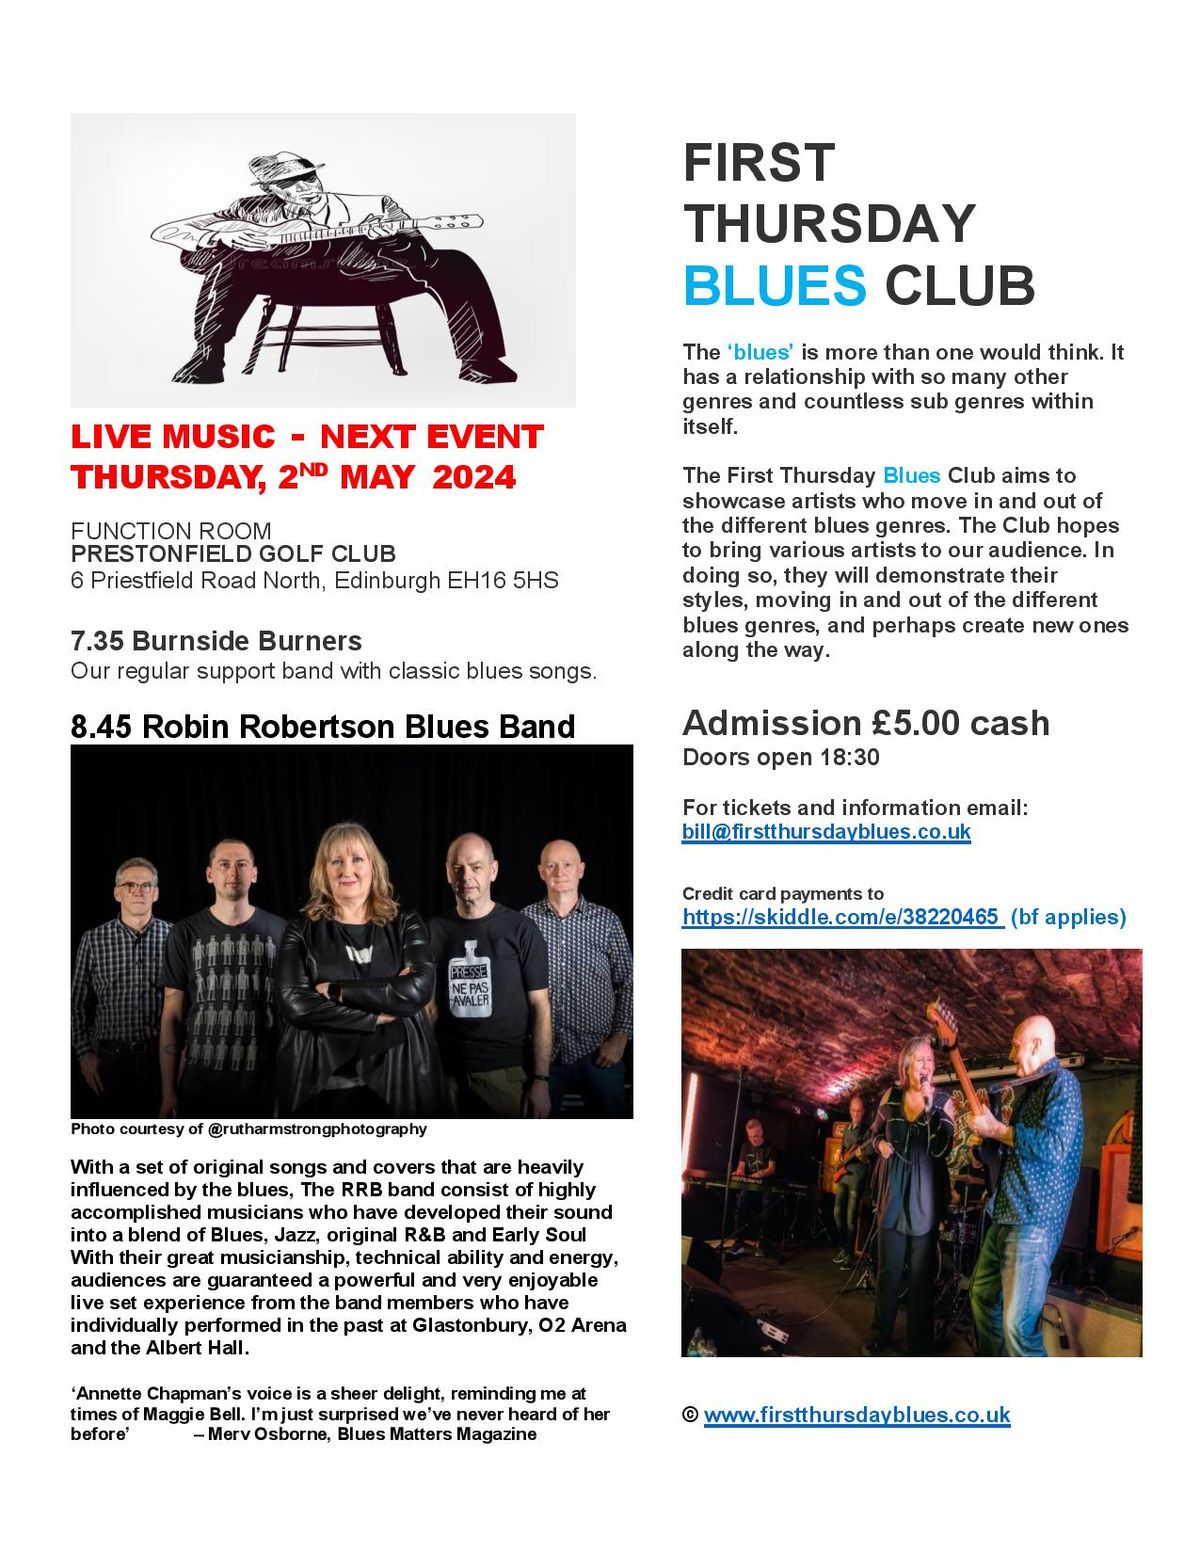 The Robin Robertson Blues Band are at the First Thursday Blues Club